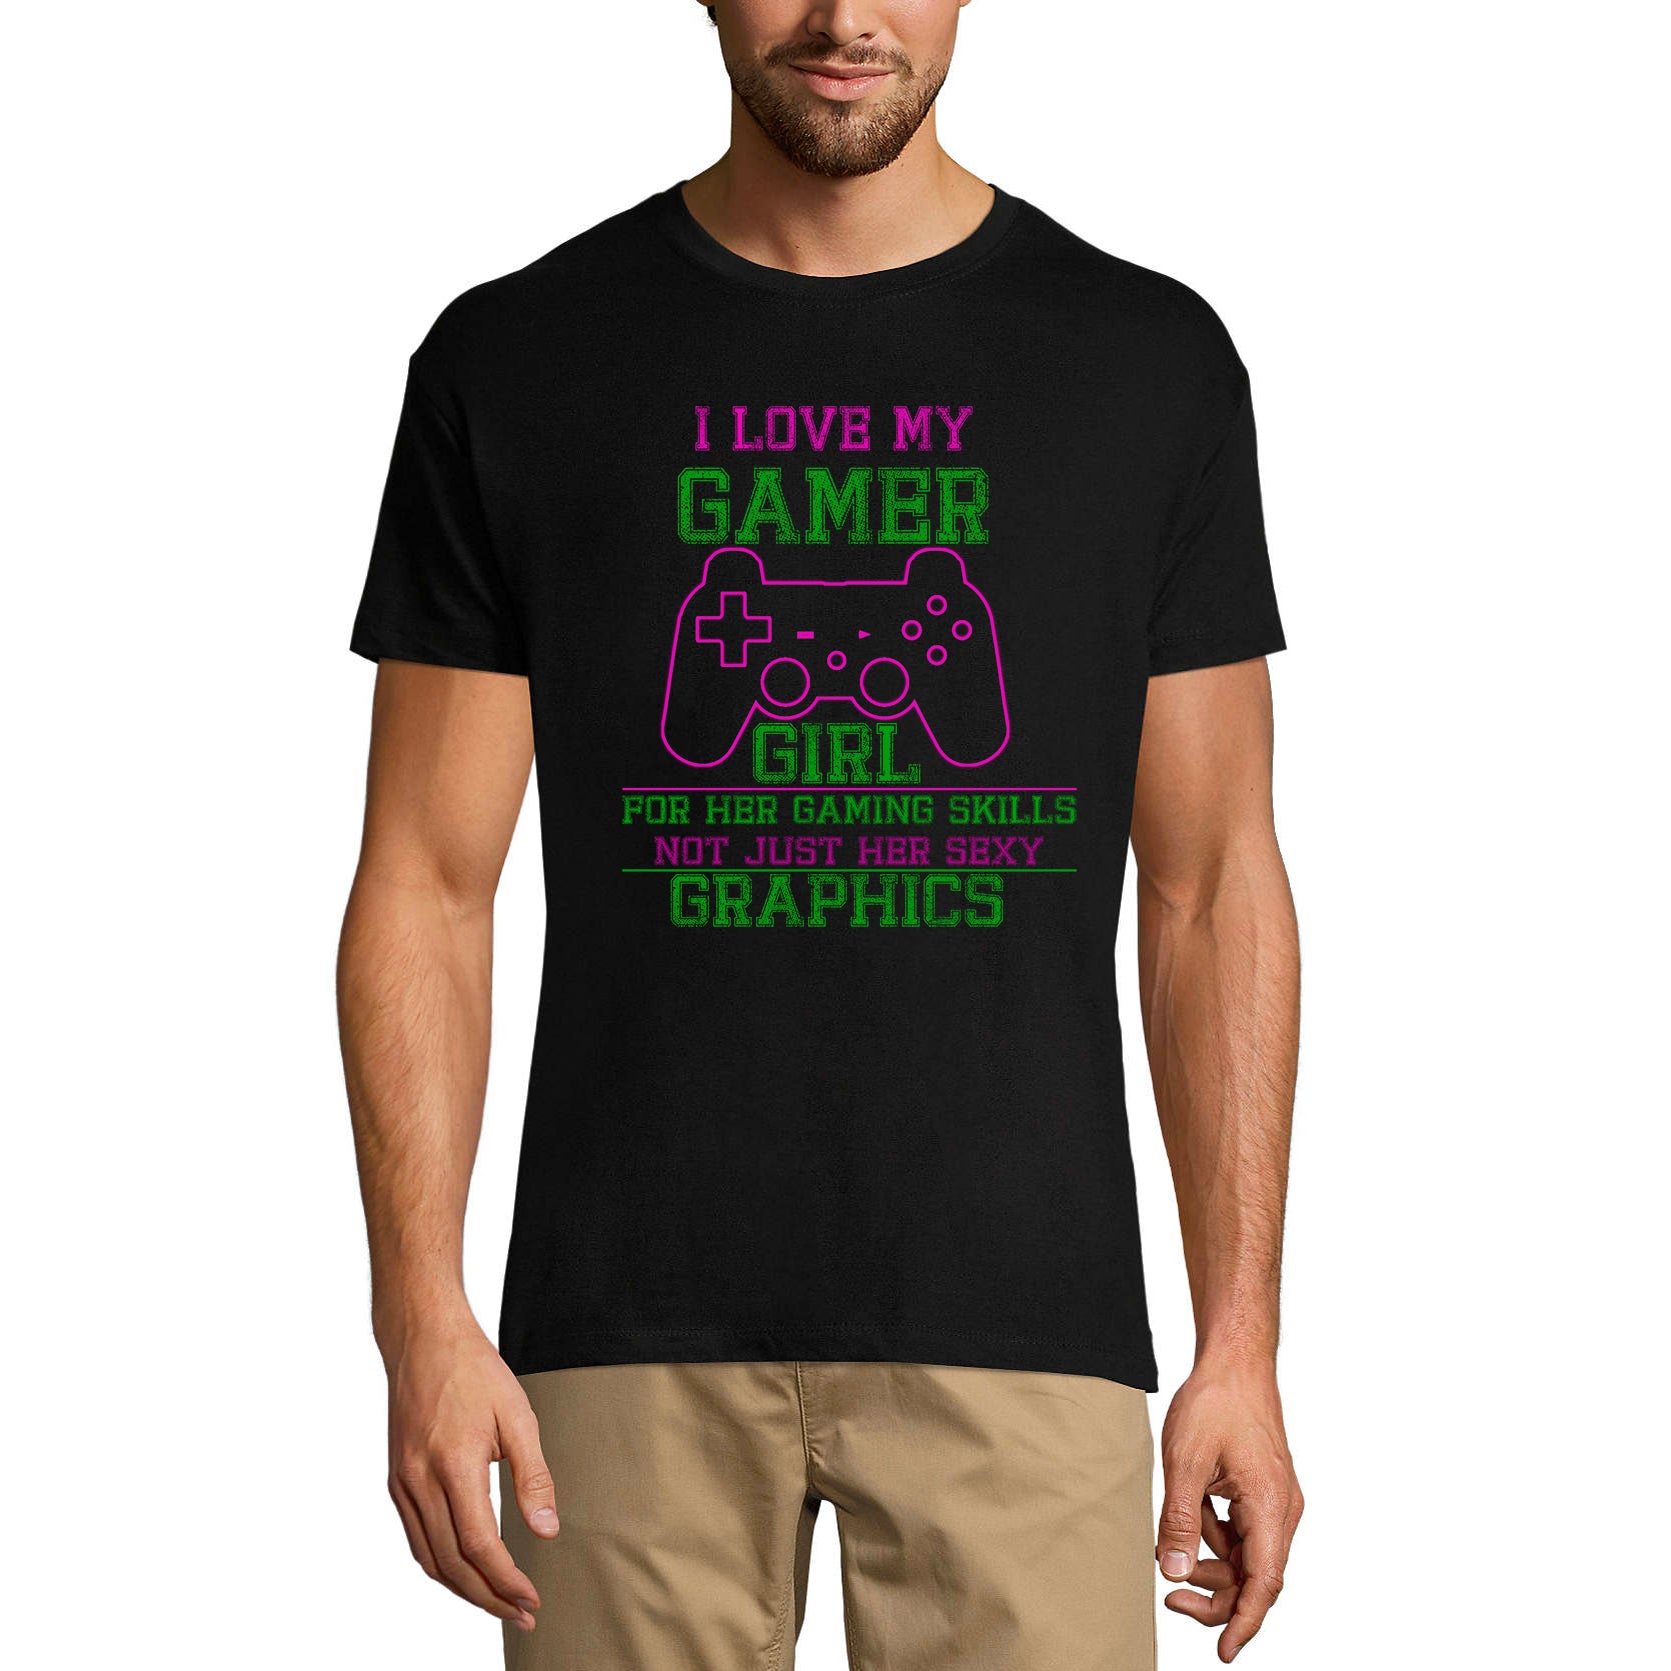 ULTRABASIC Men's Graphic I Love My Gamer Girl - Funny Gaming Apparel for Men mode on level up dad gamer i paused my game alien player ufo playstation tee shirt clothes gaming apparel gifts super mario nintendo call of duty graphic tshirt video game funny geek gift for the gamer fortnite pubg humor son father birthday